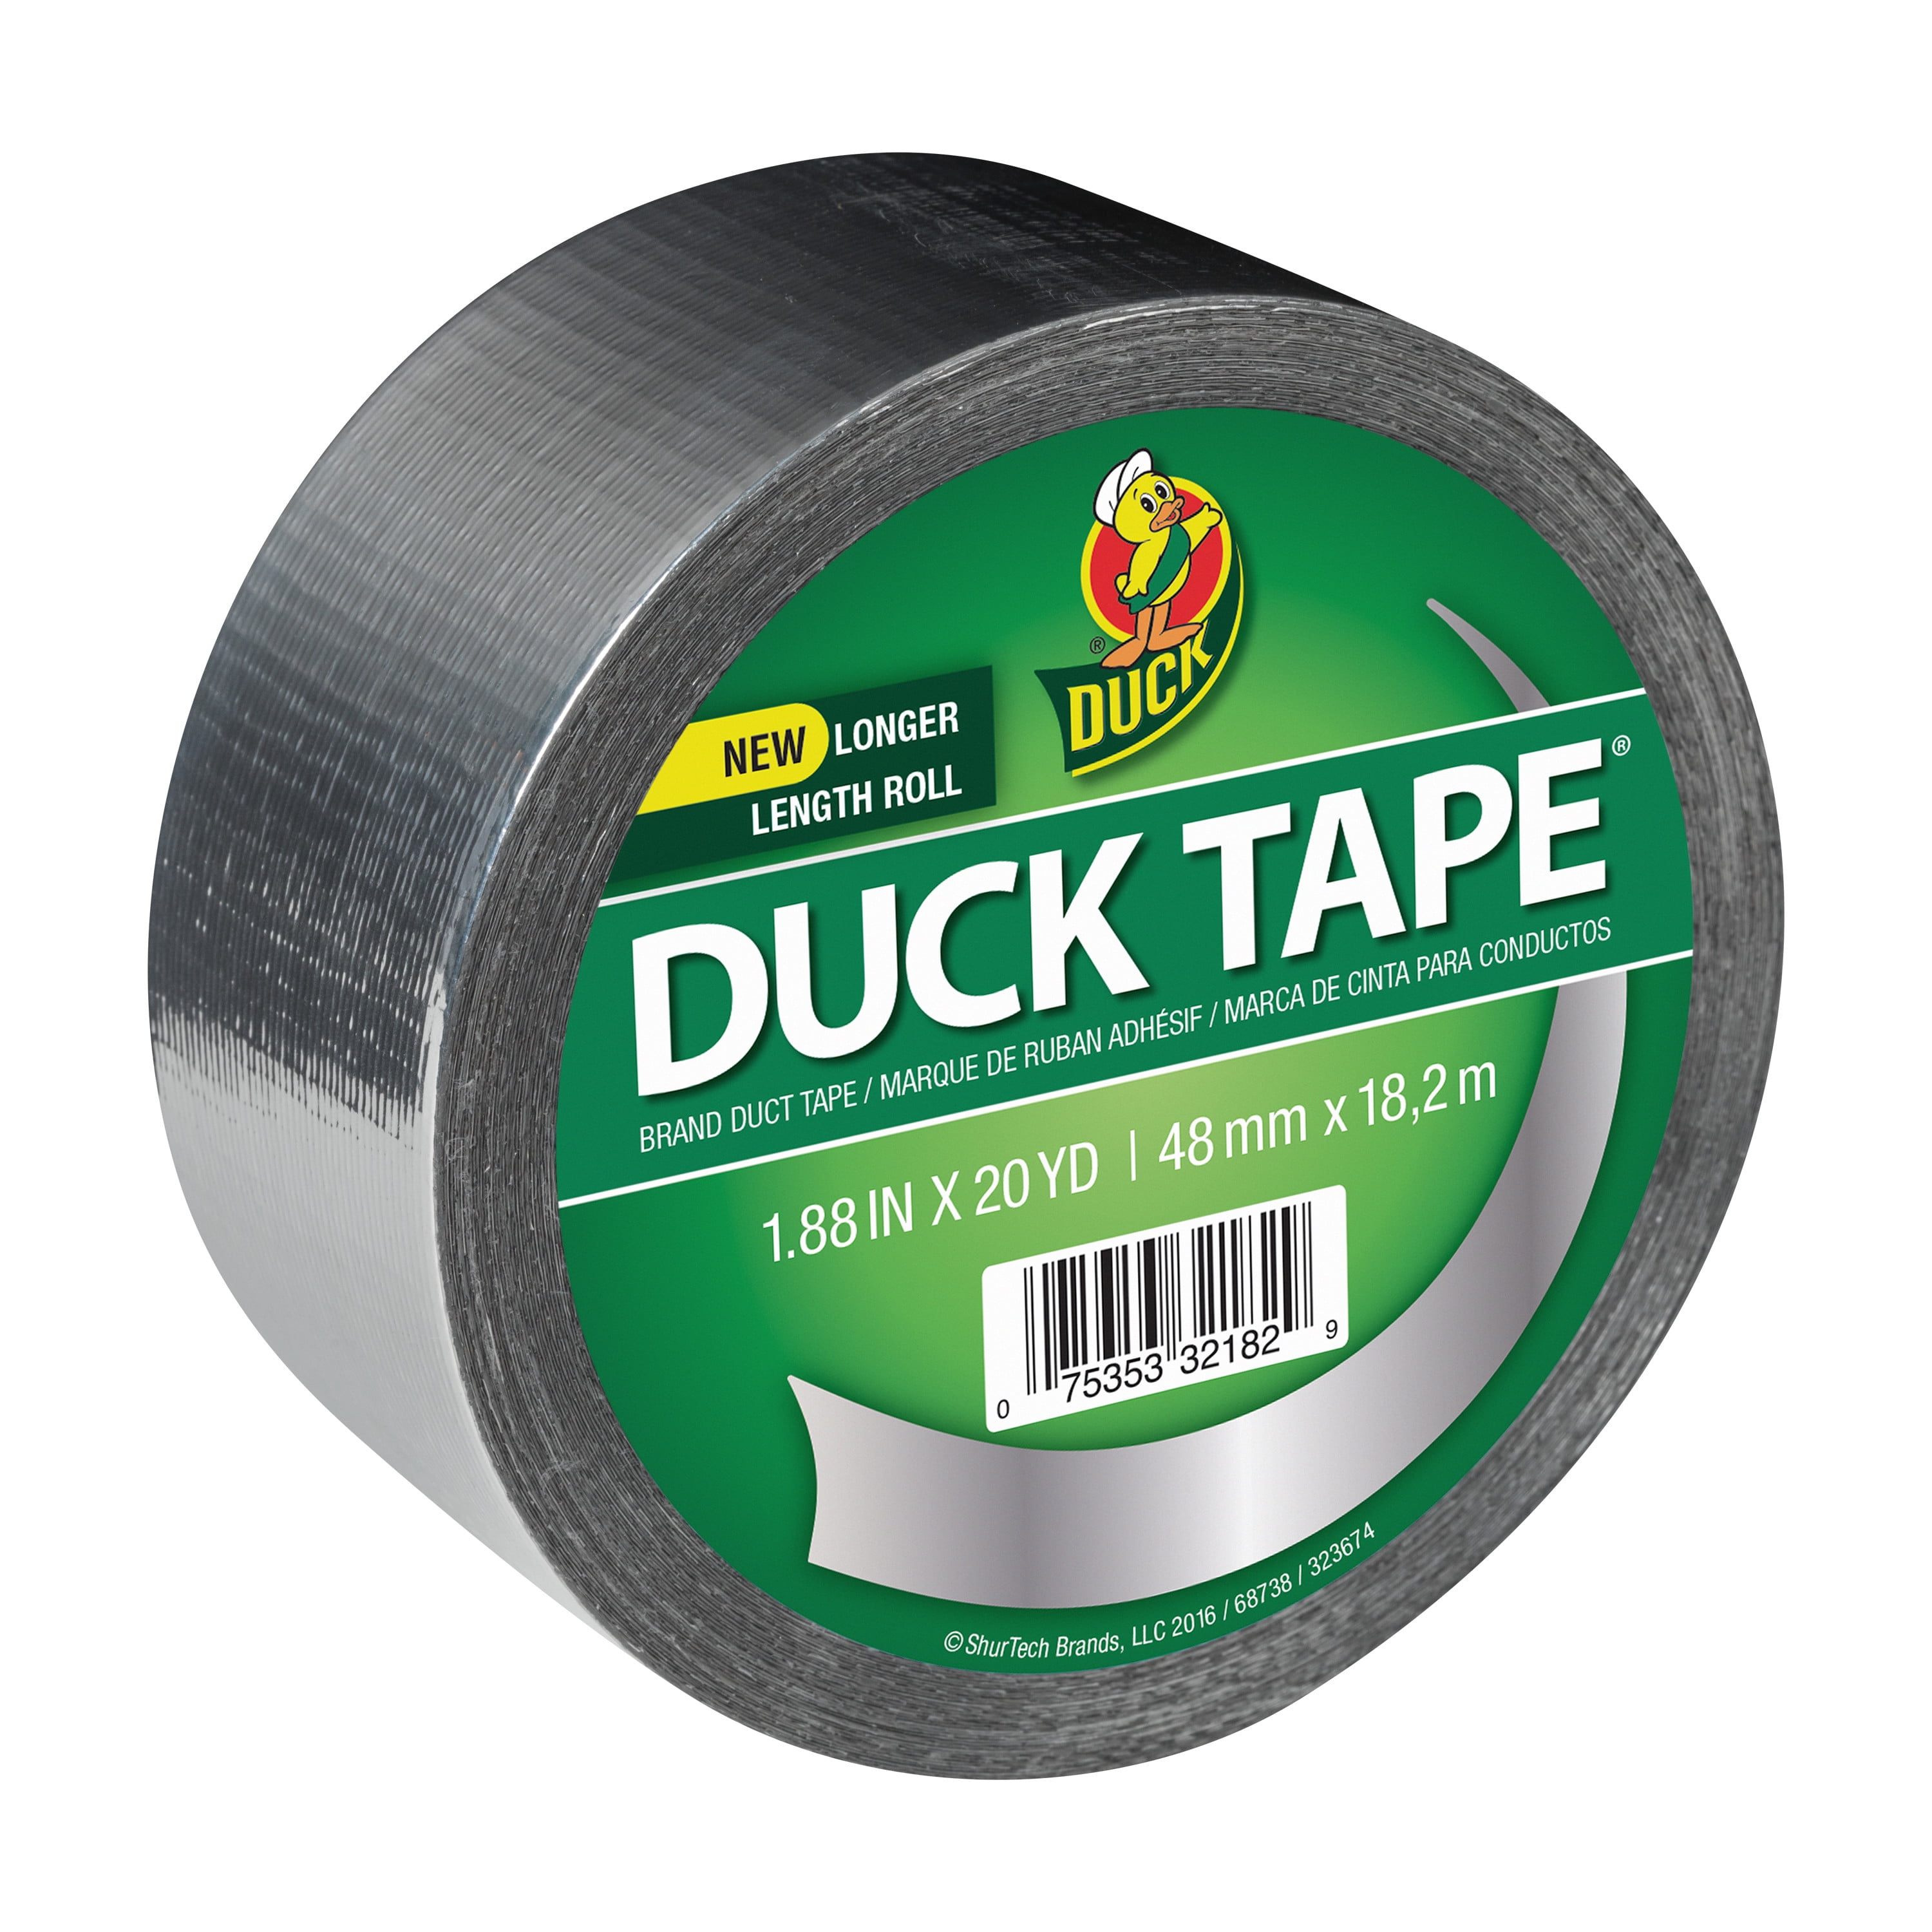 Duck® Brand Color Duct Tape - Chrome, 1.88 Inch x 15 Yard - Smith's Food  and Drug